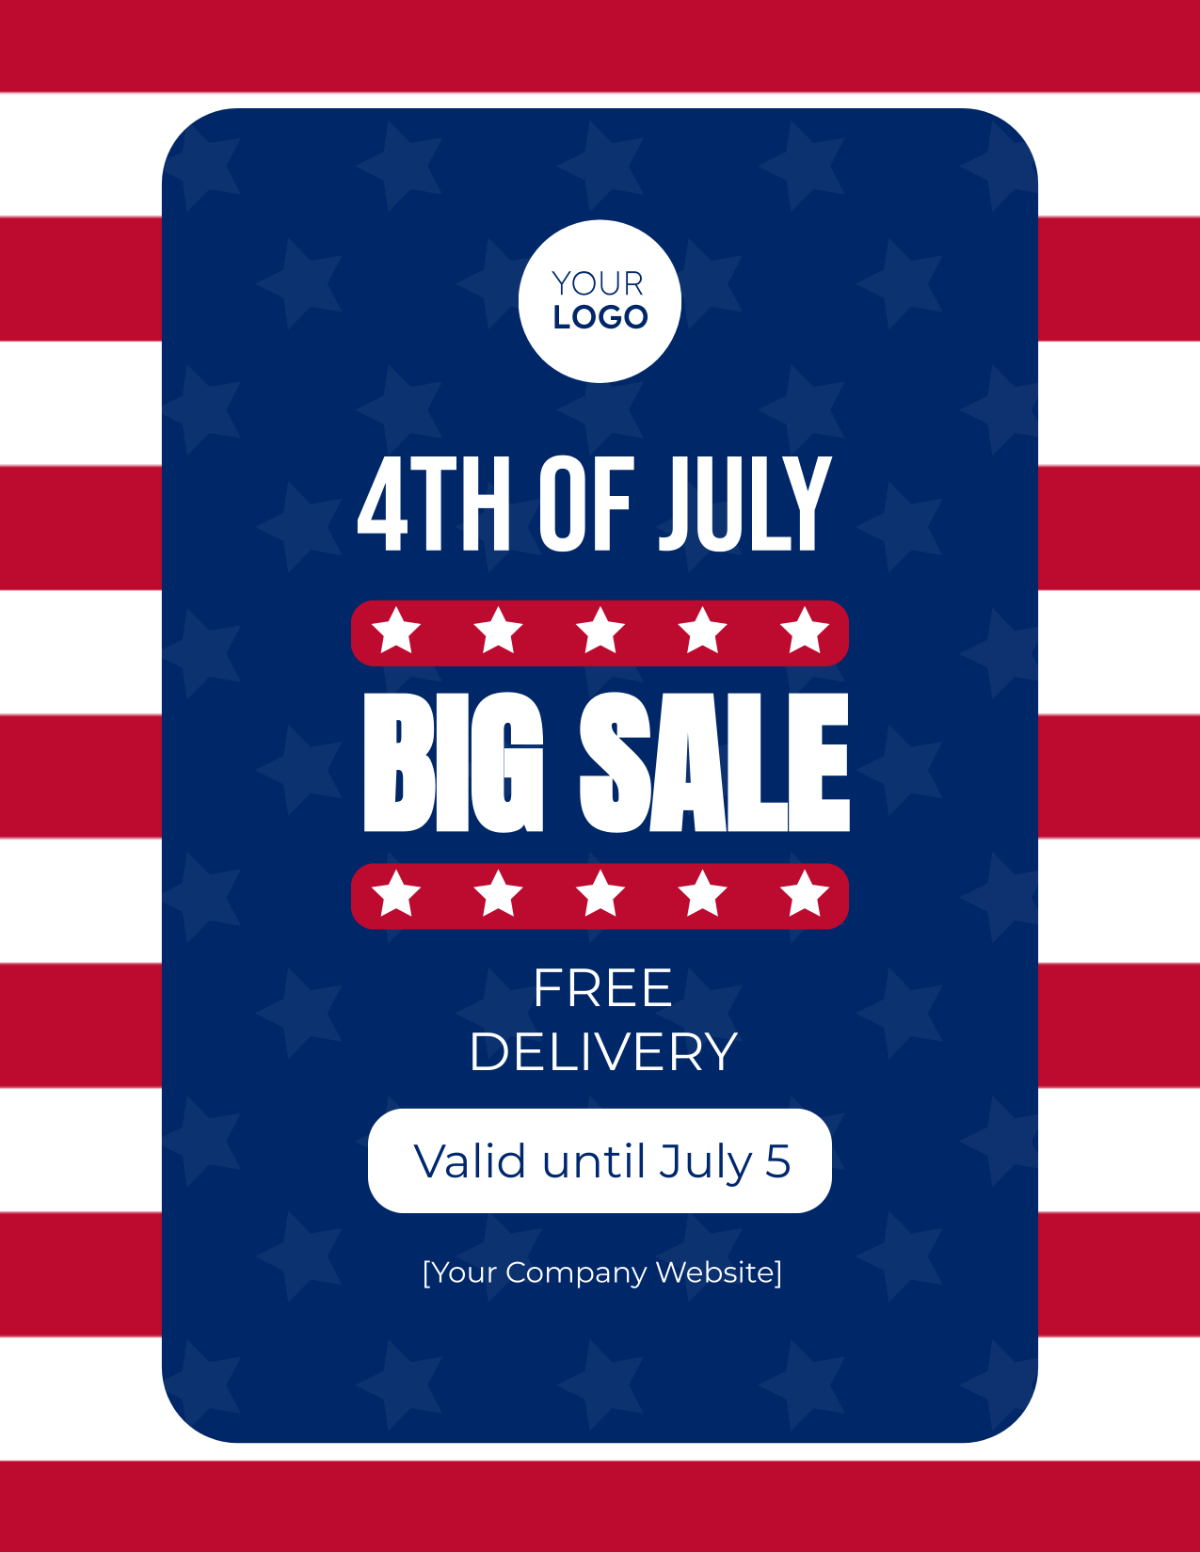 Home Depot 4th of July Sale Flyer